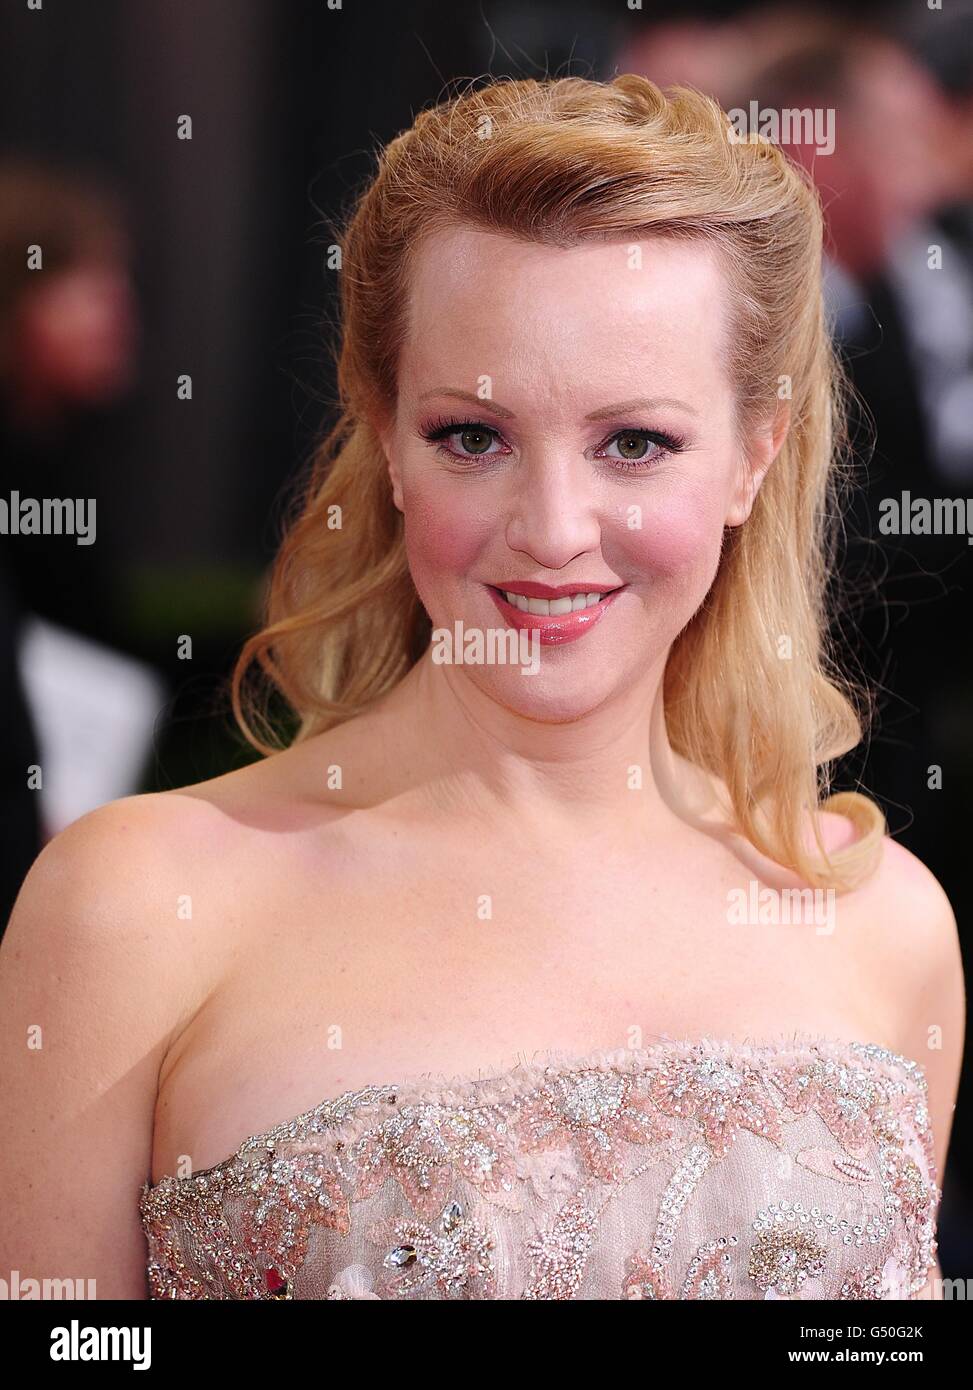 Wendi McLendon-Covey arriving at the 84th Annual Academy Awards, held at the Kodak Theatre in Los Angeles, CA, USA on February 26, 2012. () Stock Photo